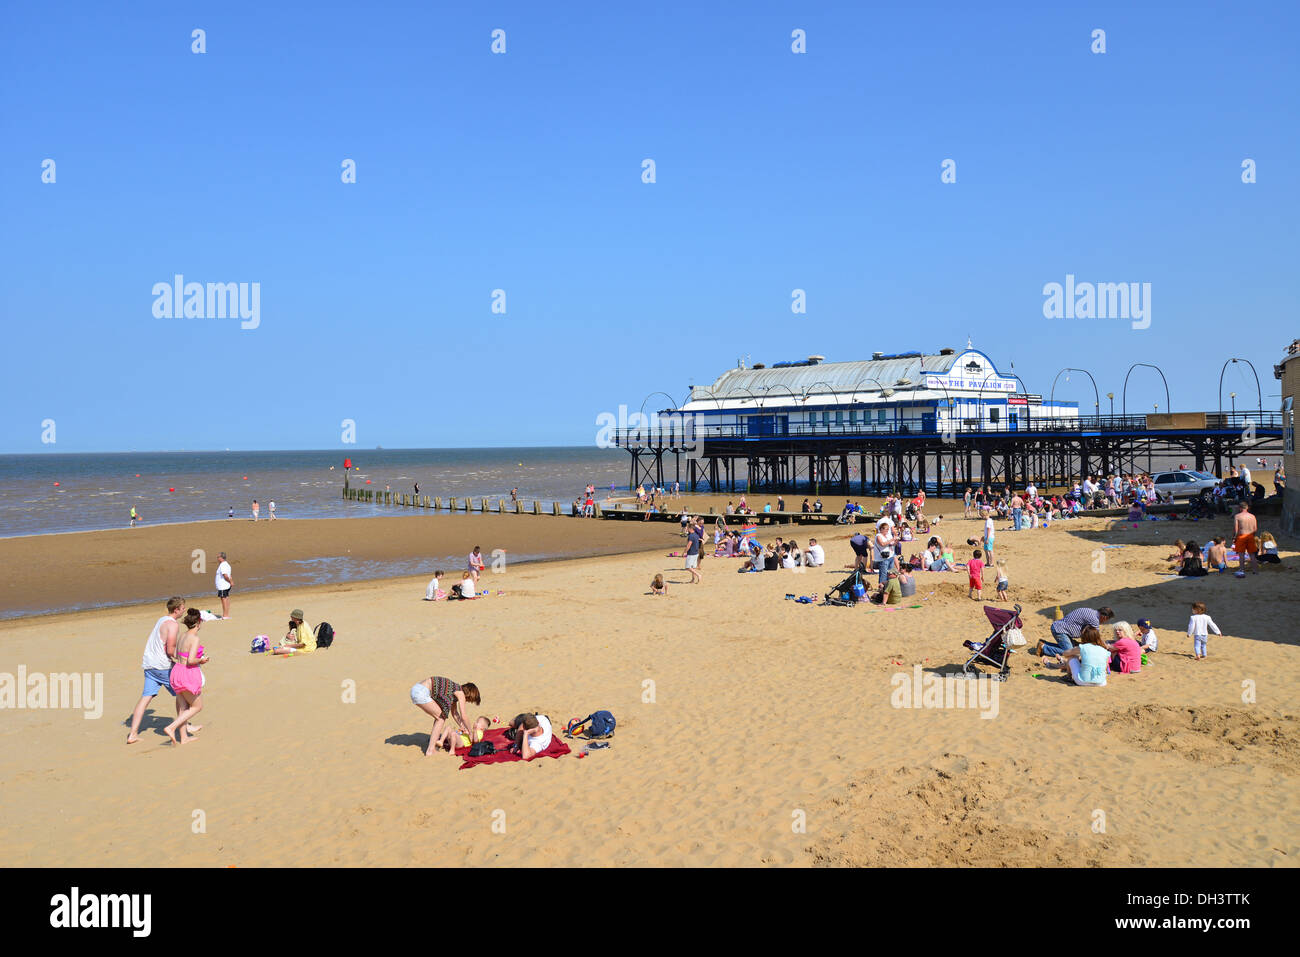 Cleethorpes Beach and Pier, Cleethorpes, Lincolnshire, England, United Kingdom Stock Photo